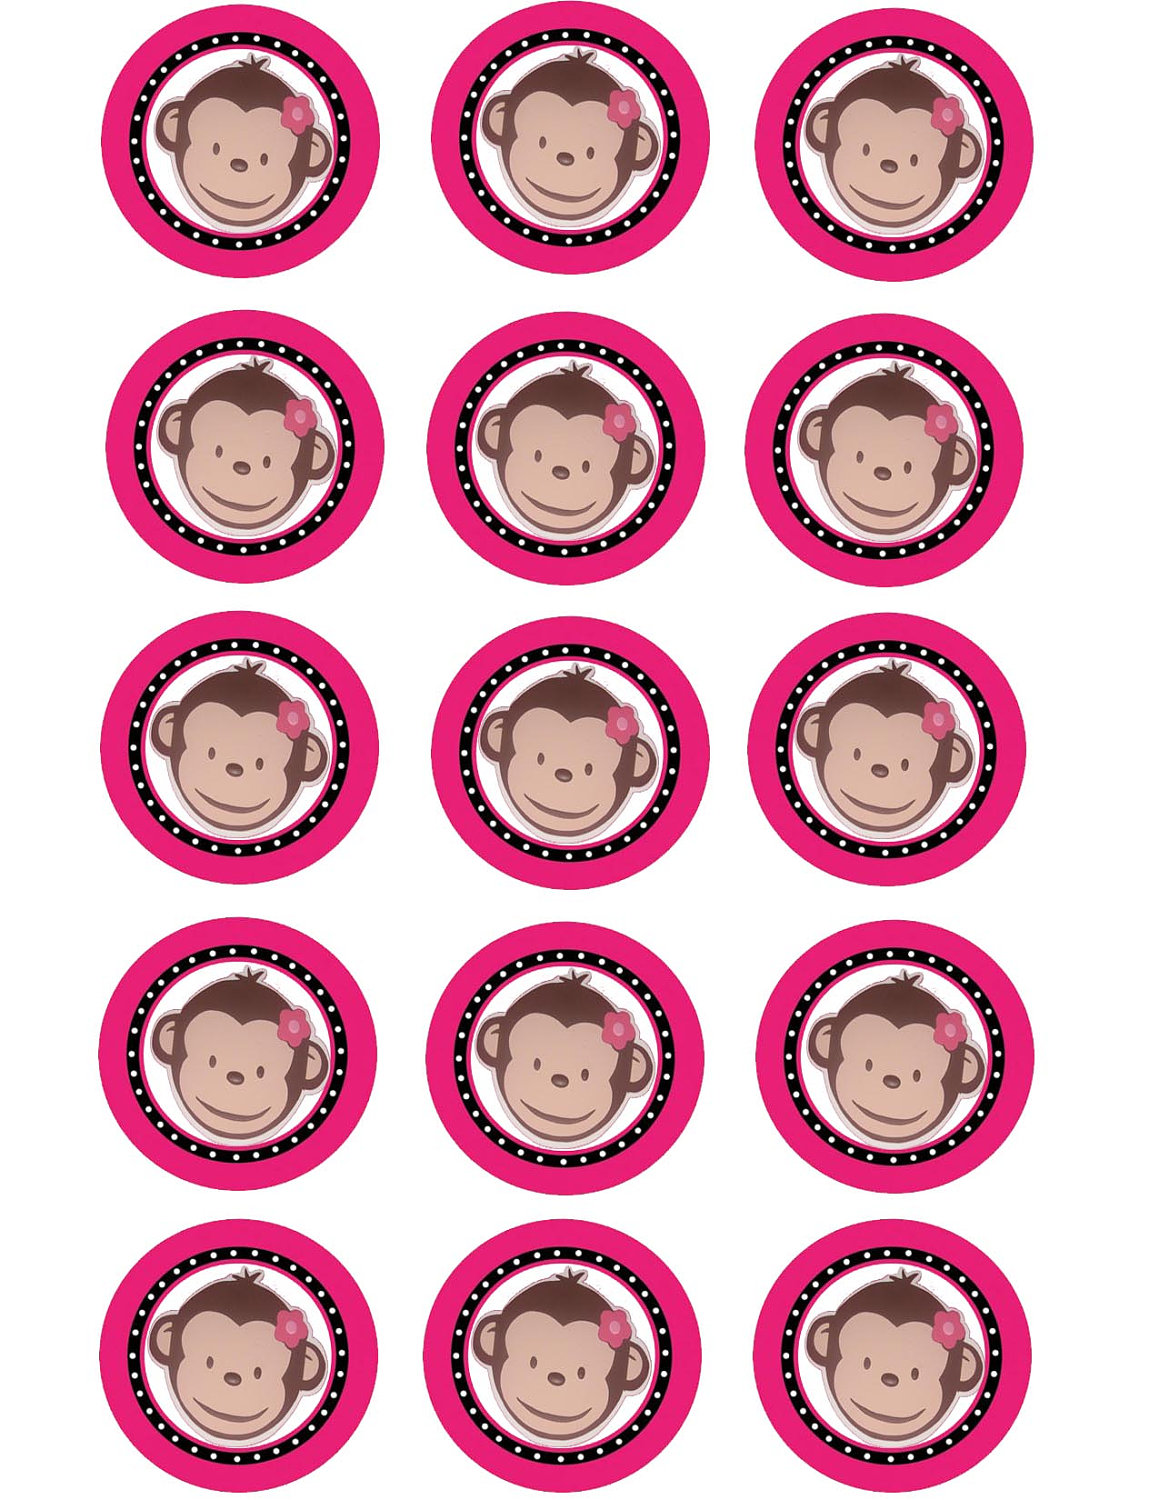 Girly Monkey Clip Art | Clipart Panda - Free Clipart Images